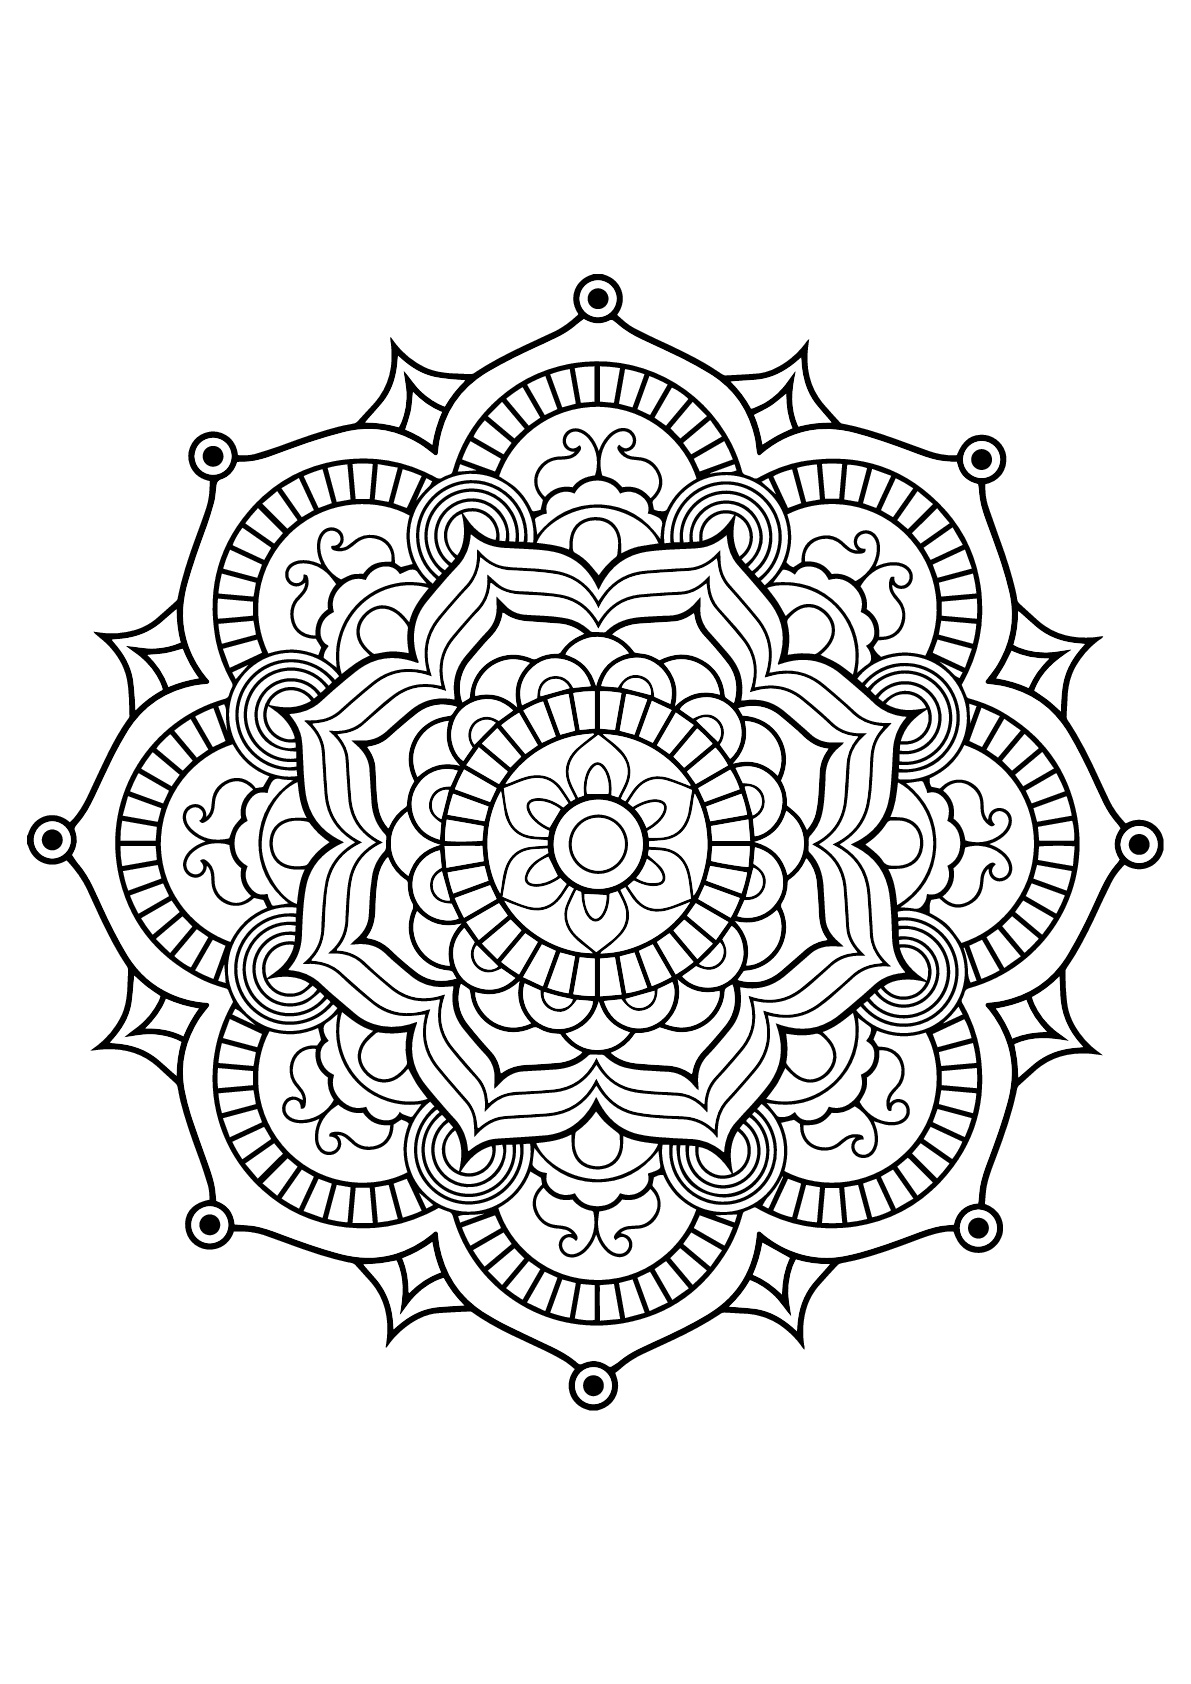 Mandala mit pflanzlichen Mustern aus Free Coloring book for adults